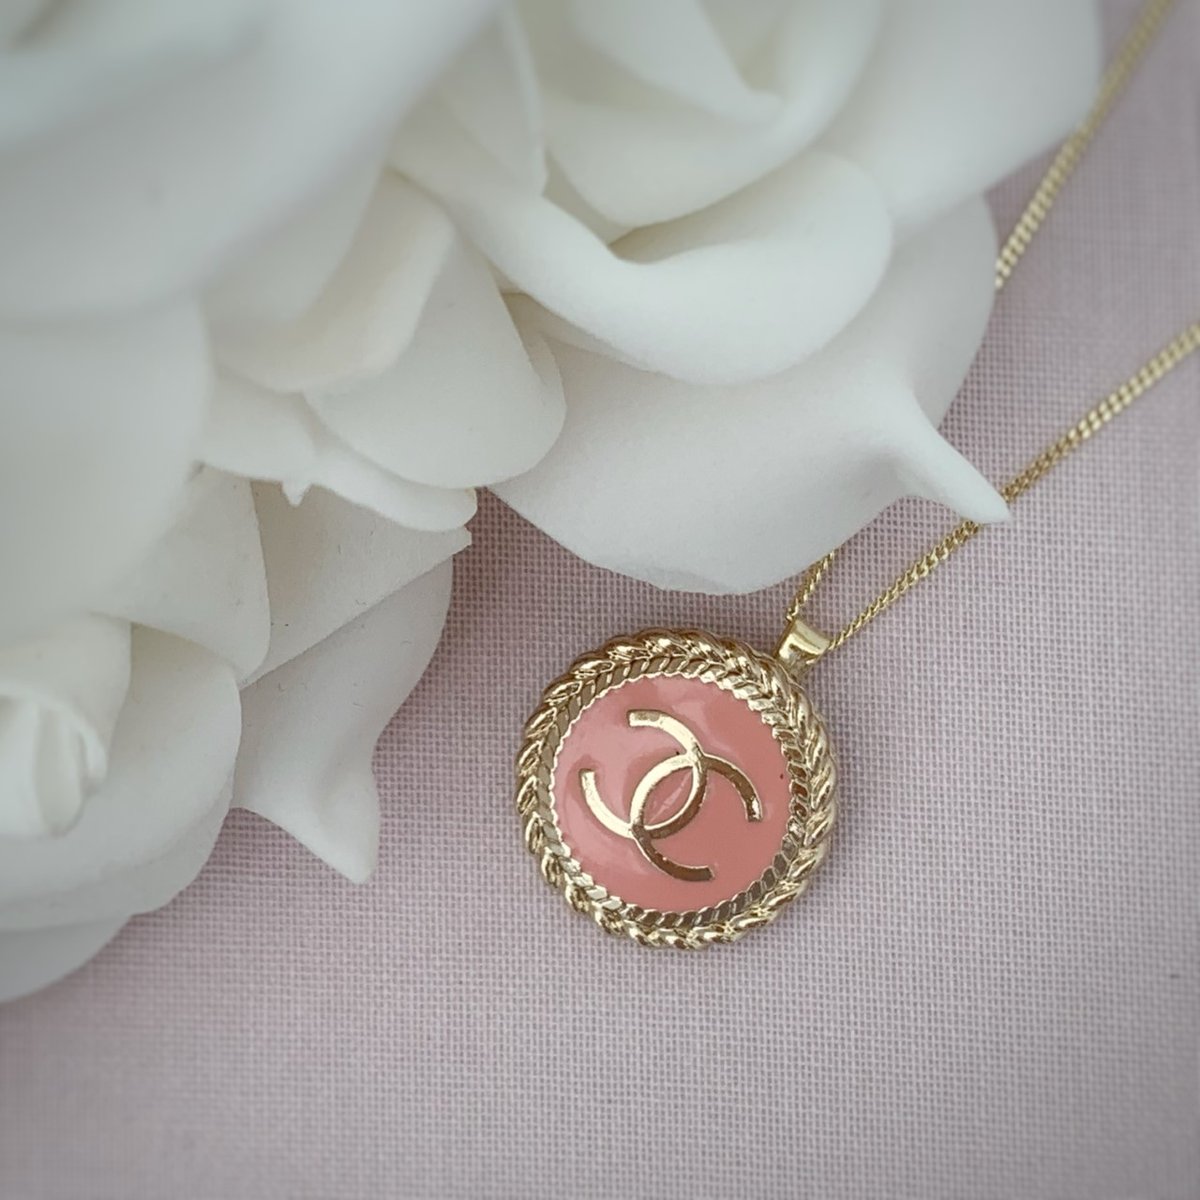 Reworked Pink Chanel Pendant